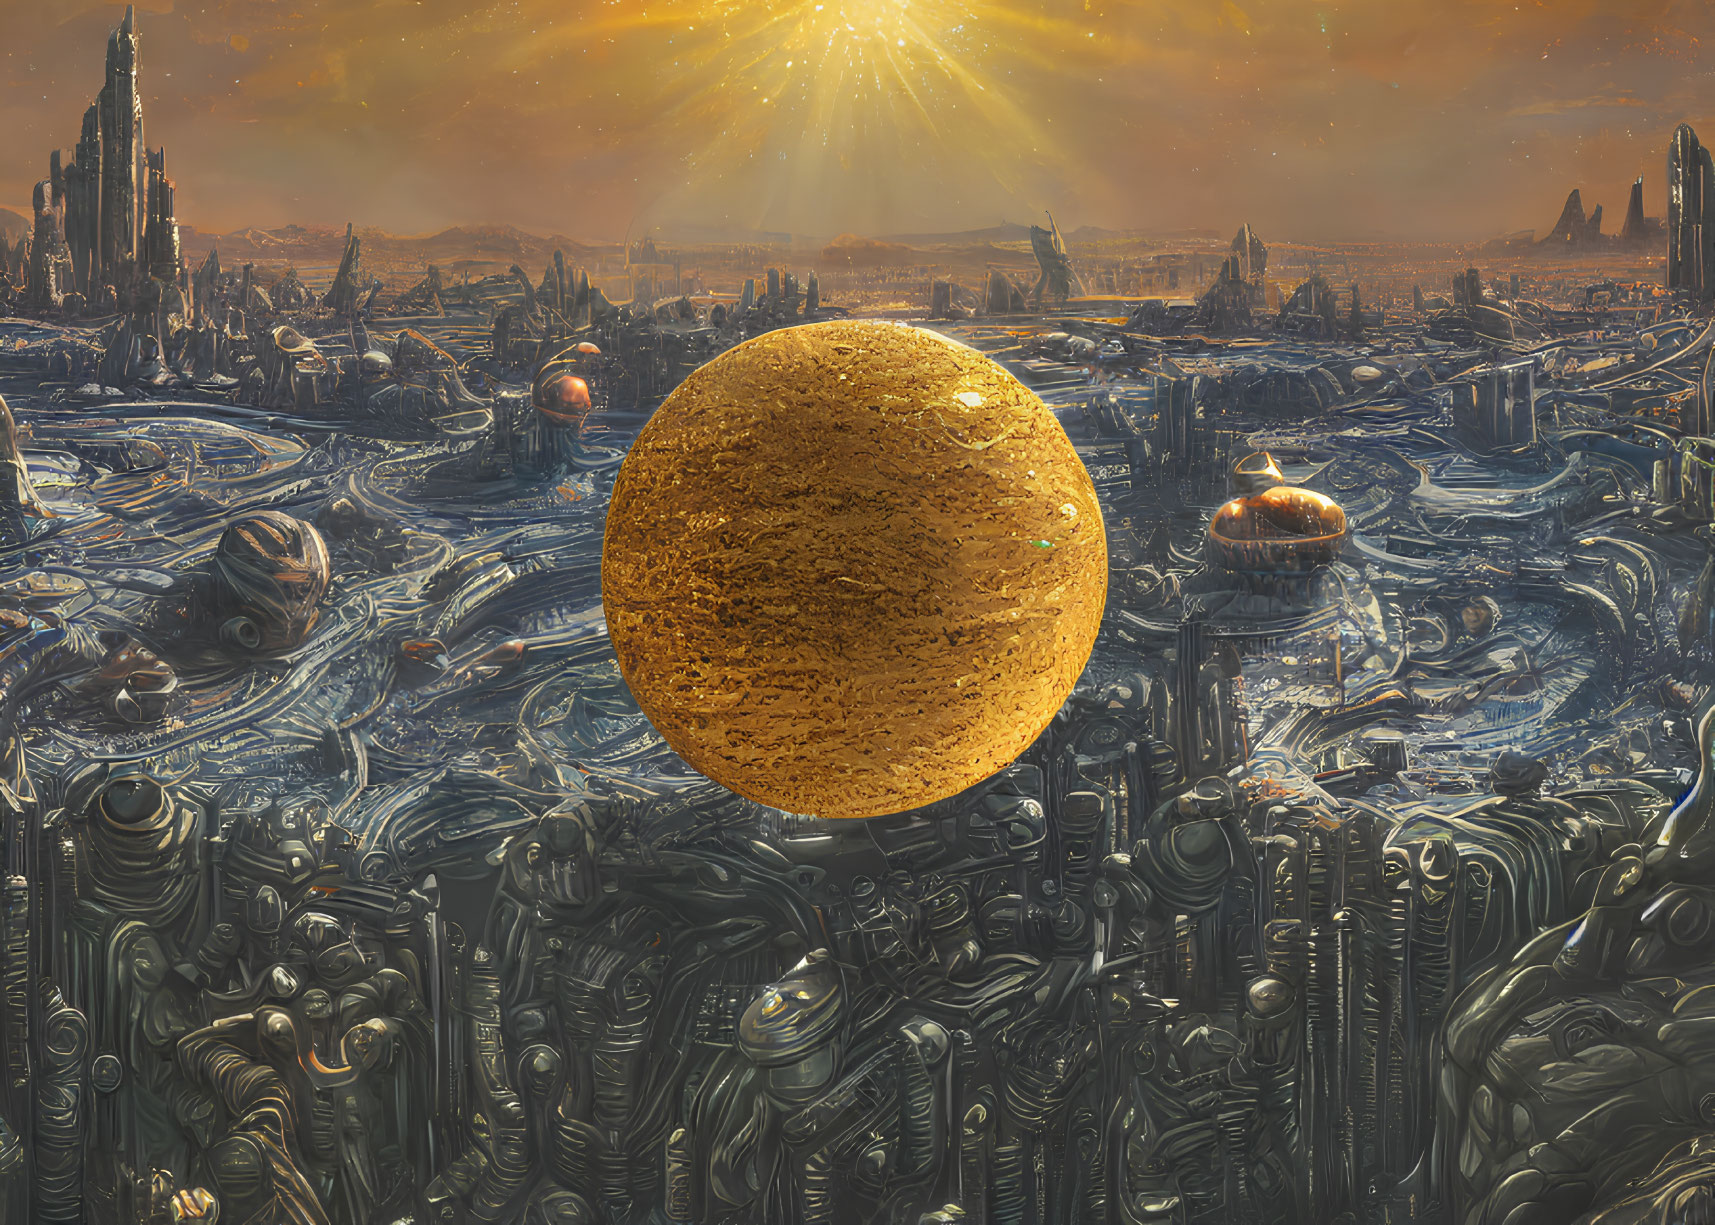 Futuristic landscape with machinery, spires, and golden sphere under sun